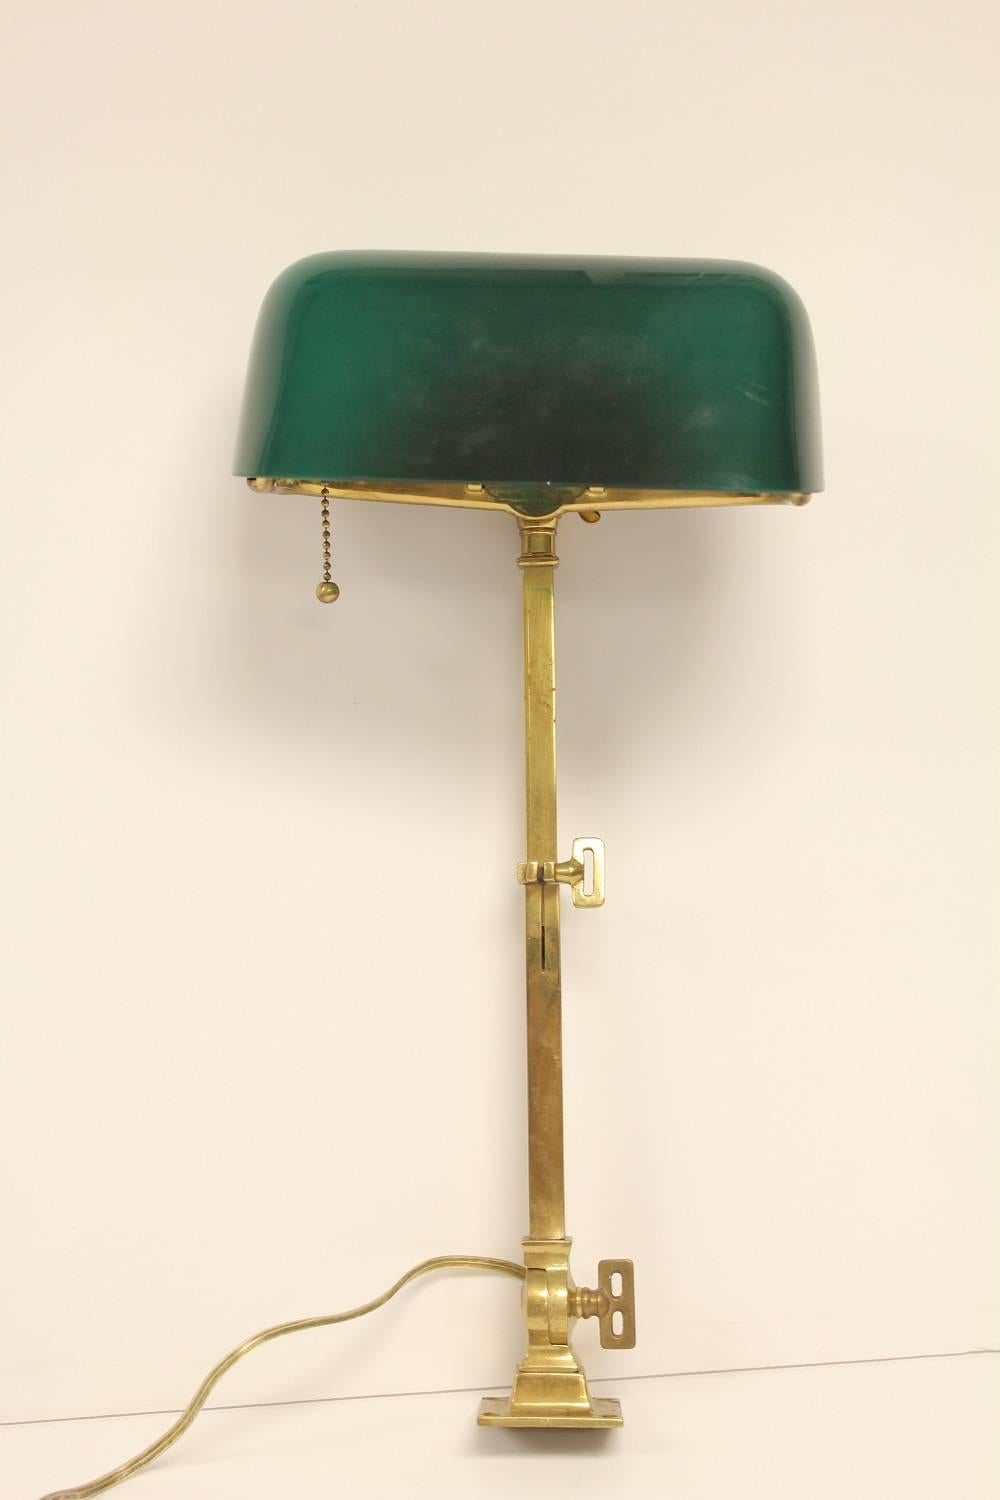 1920s American Emeralite brass adjustable desk lamp by H.G. McFaddin & Co with original glass shade. Triple-jointed.